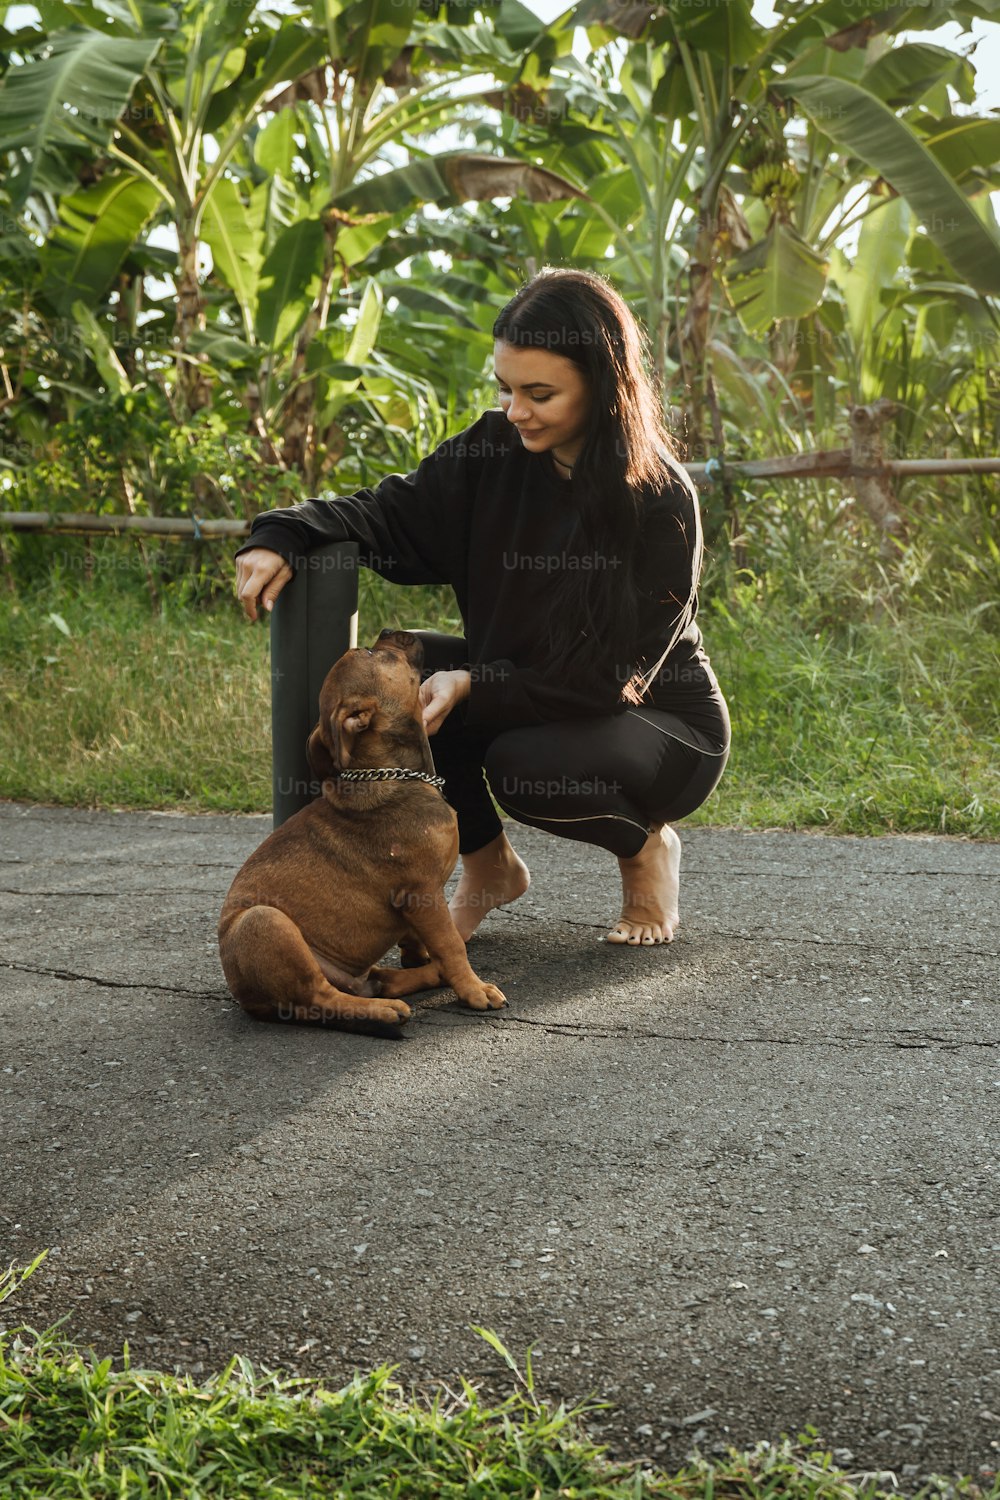 a woman kneeling down next to a brown dog